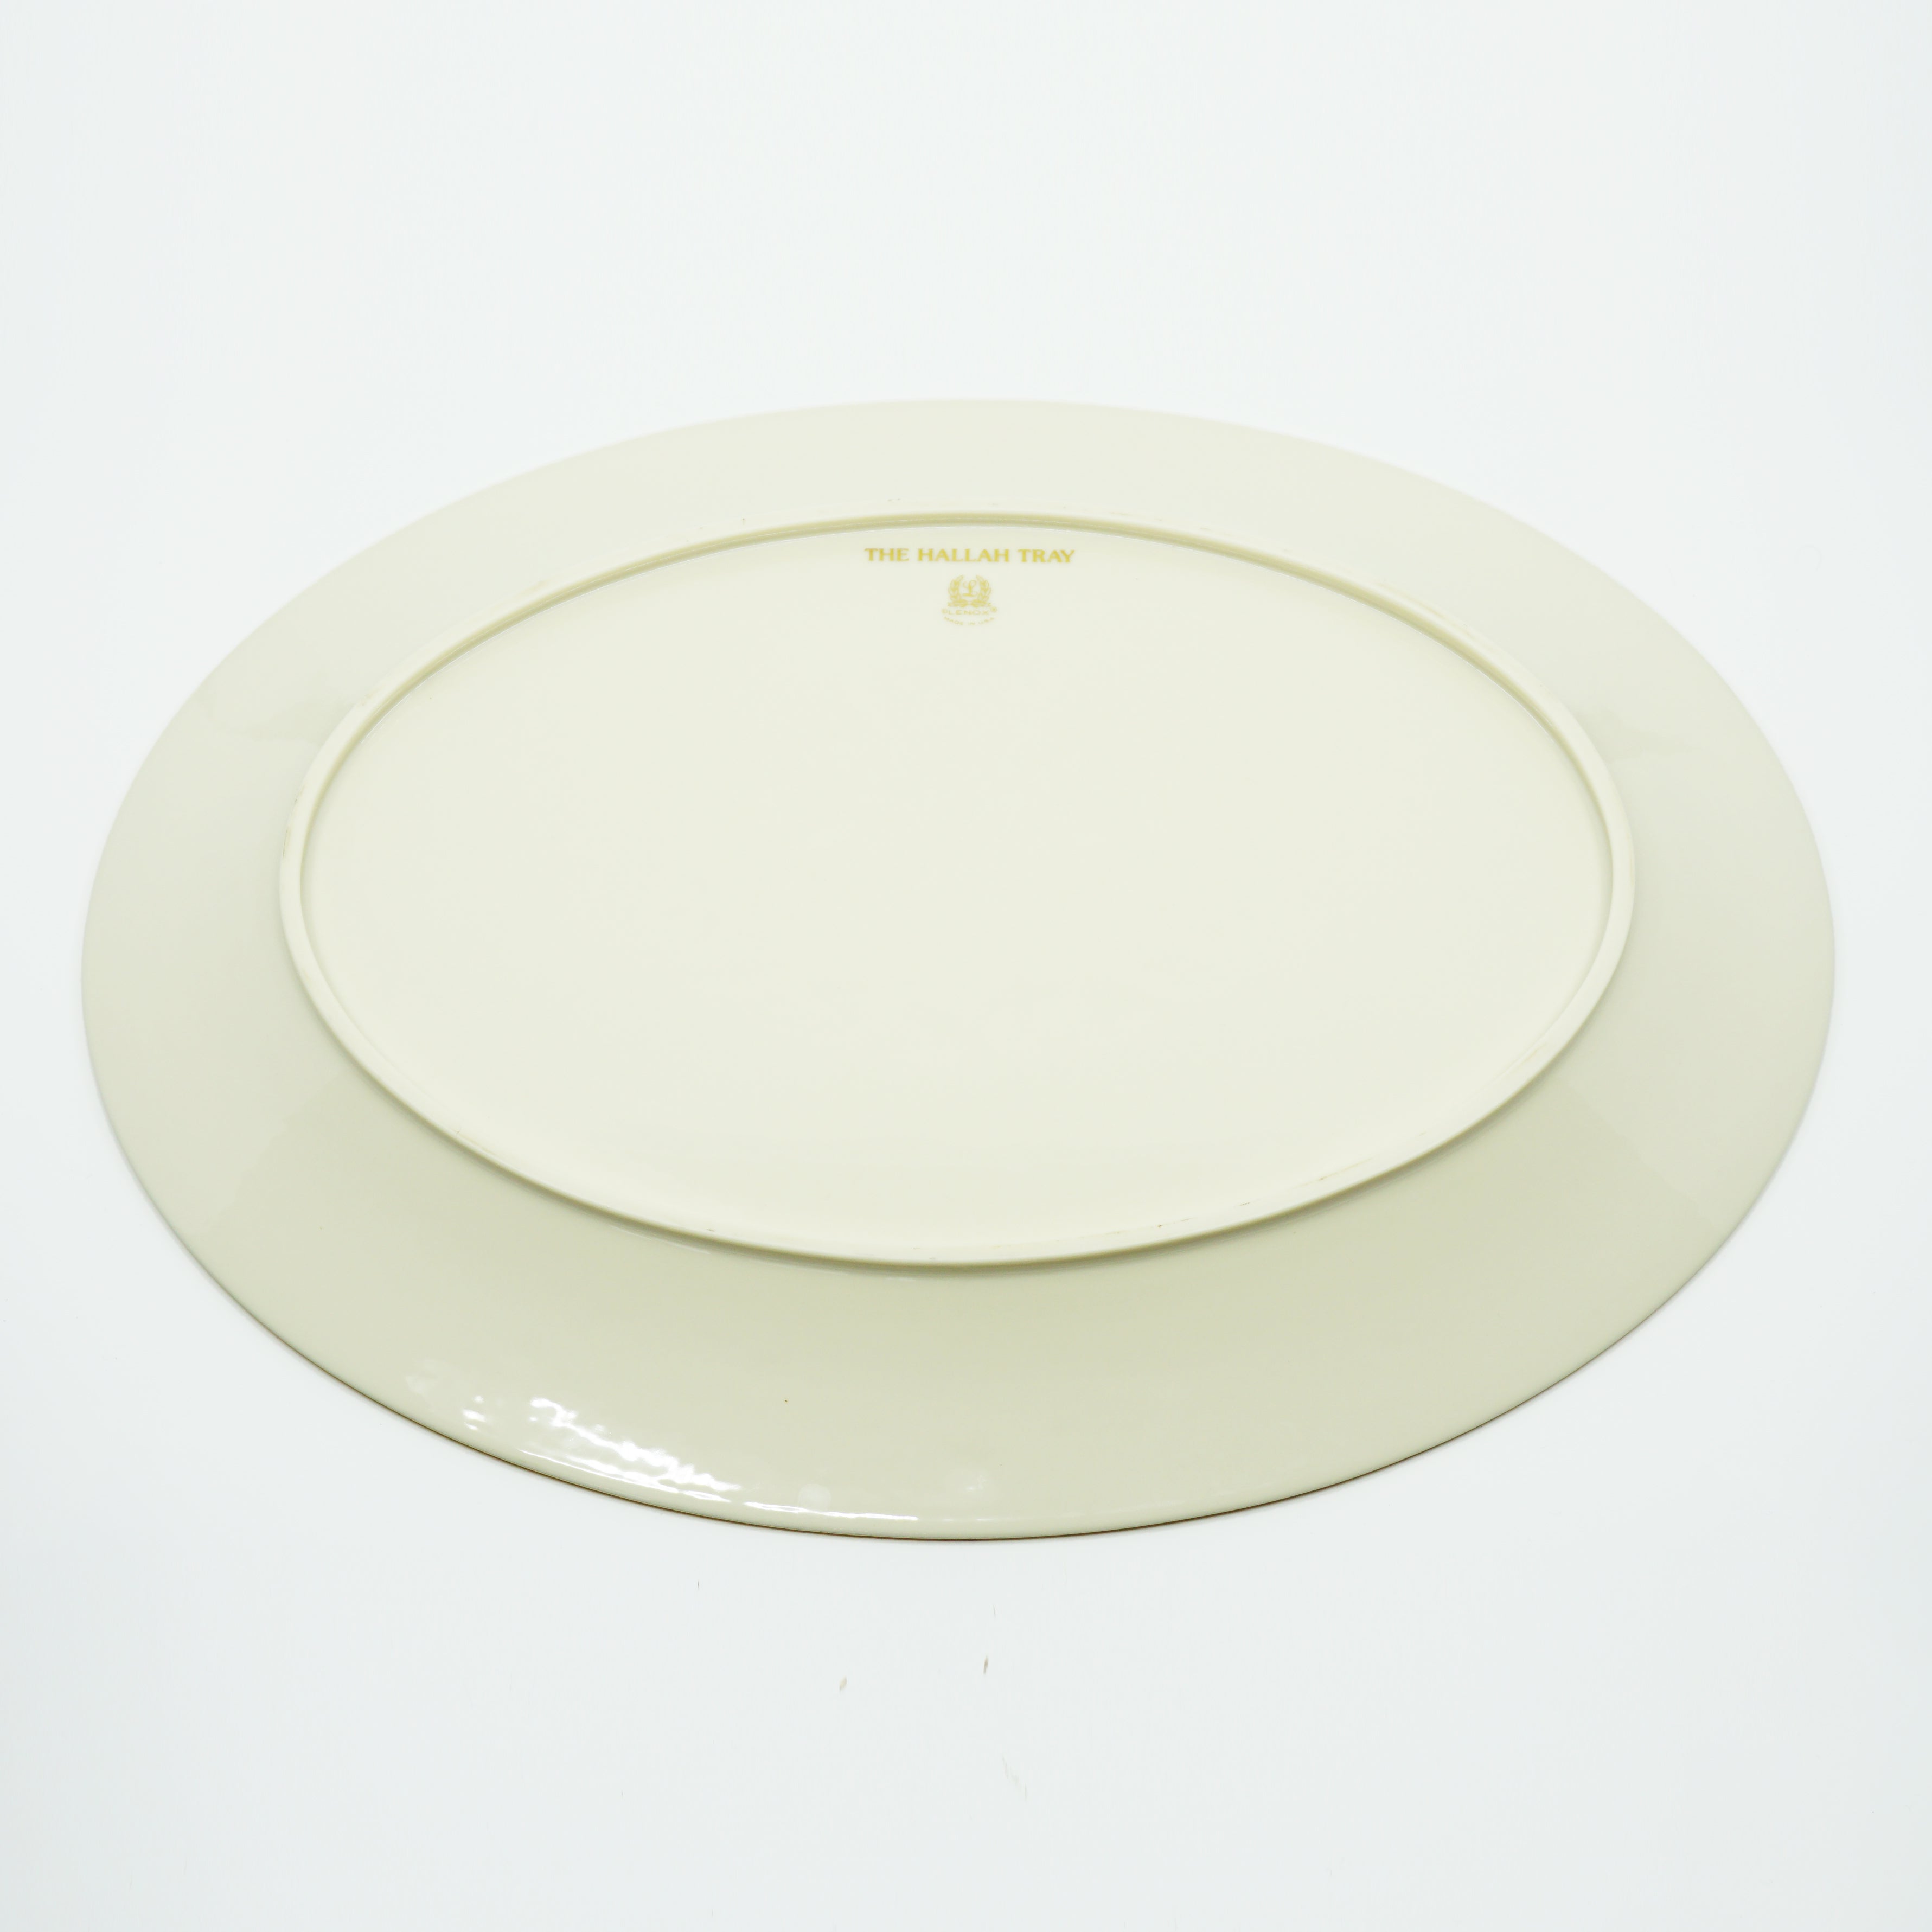 Judaica Porcelain Challah Tray Plate By Lenox USA. Ivory with Gold Oval Platter 16.5"